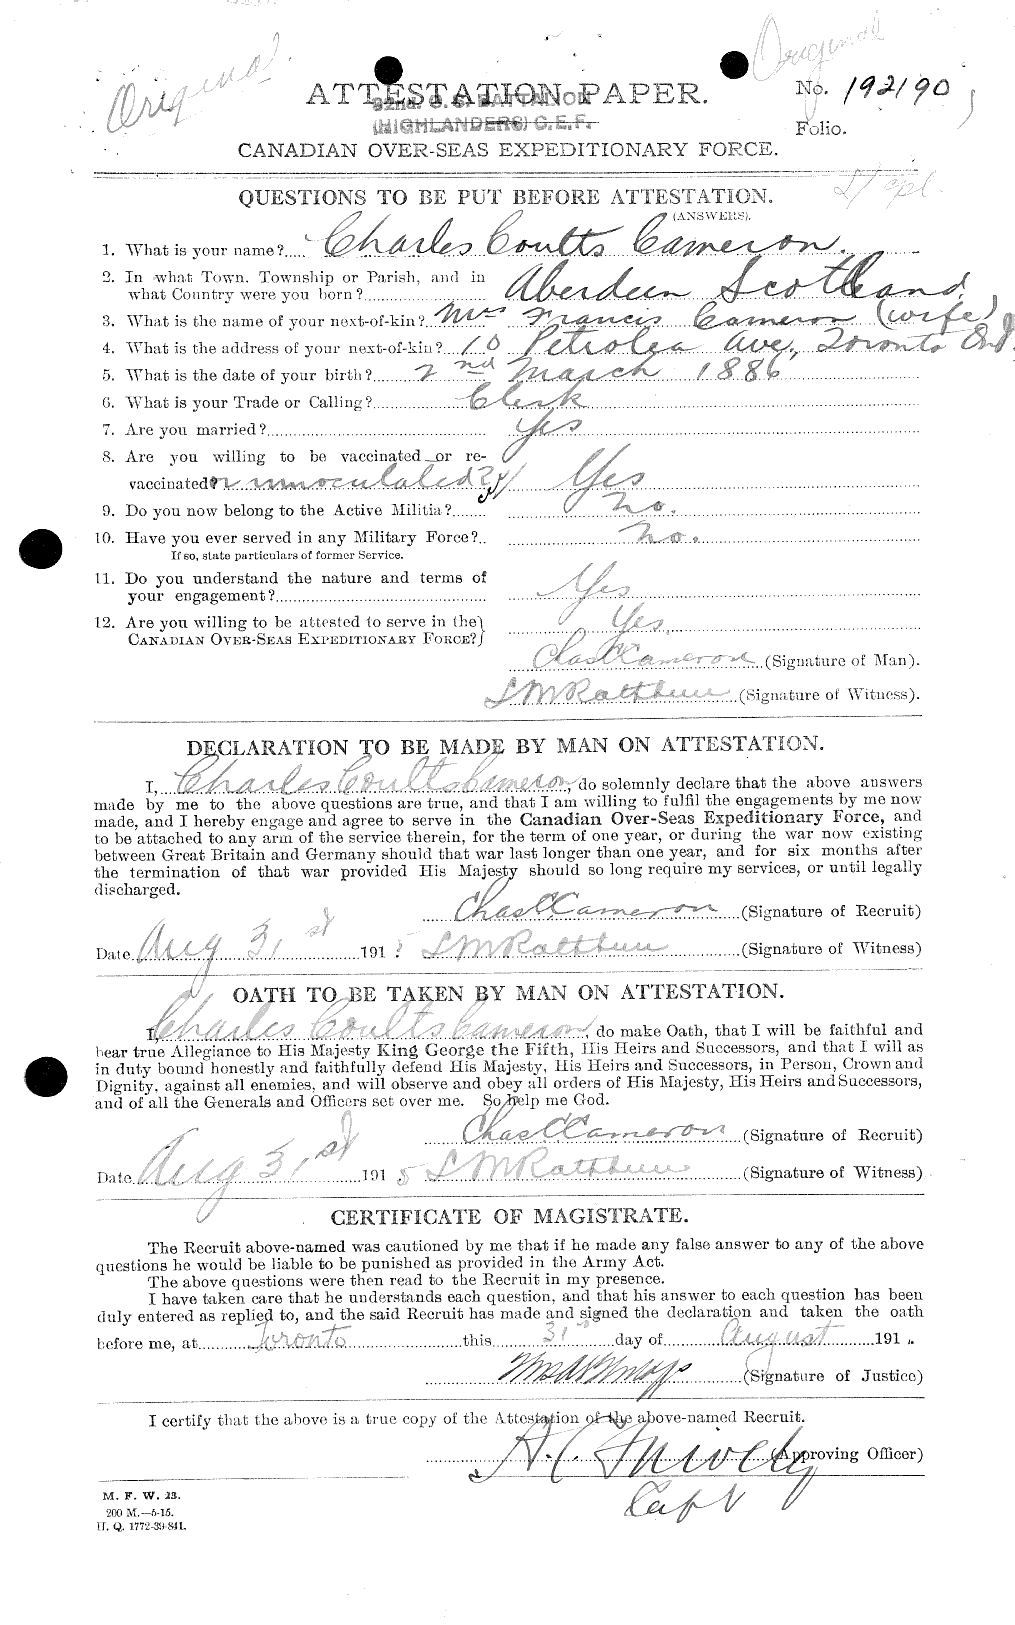 Personnel Records of the First World War - CEF 002604a